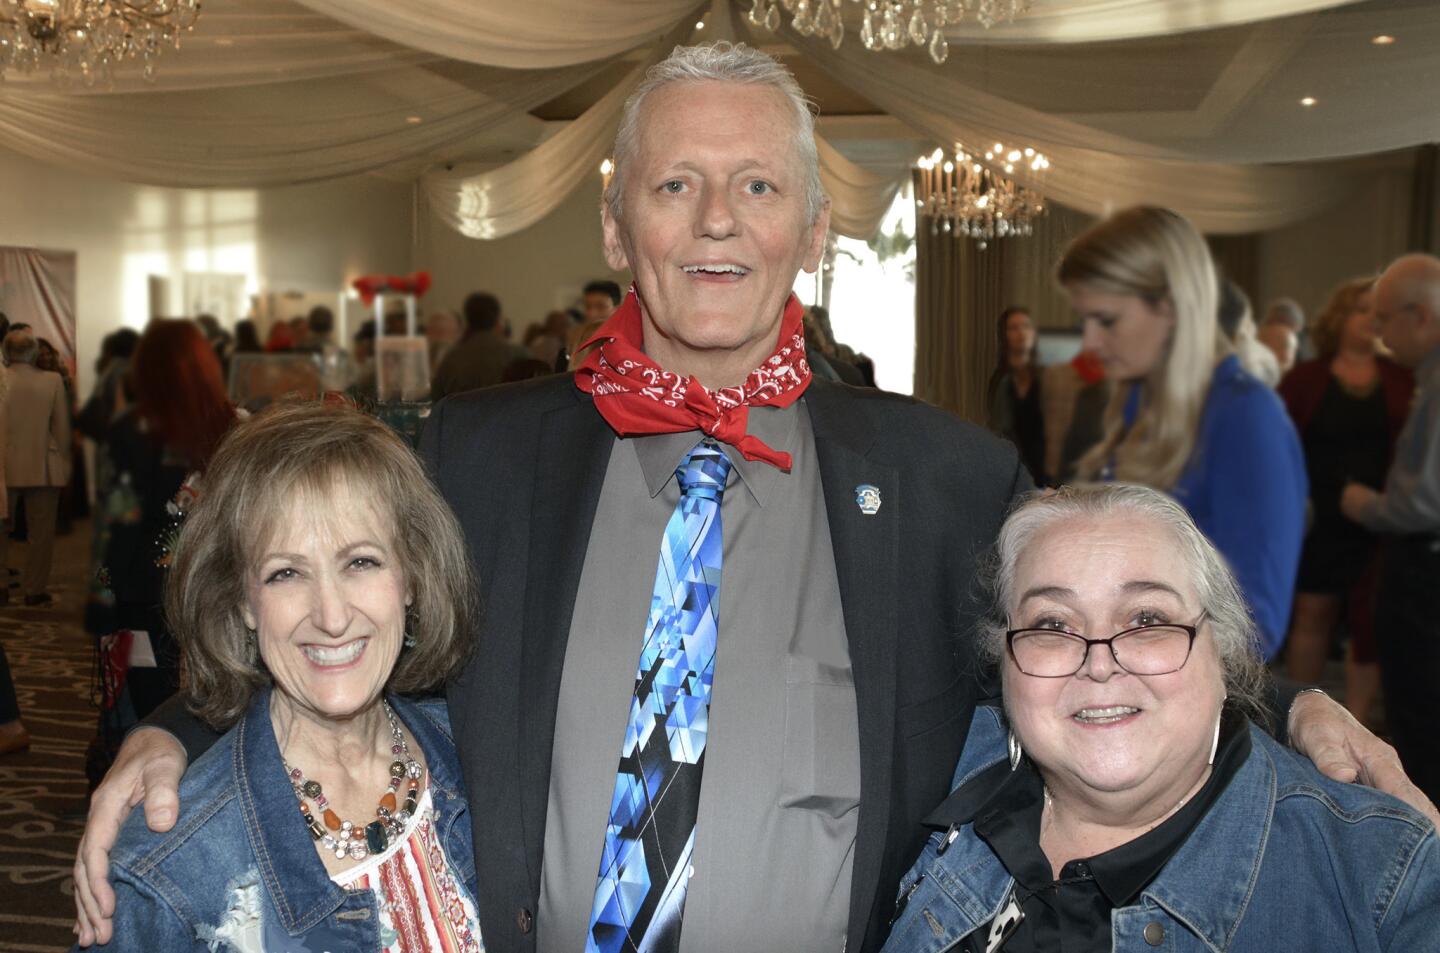 Event Chair Nancy Gams Korb, left, and BTAC Executive Director Barbara Howell welcoming Burbank Top Award for Citizenship Award honoree Mayor Will Rogers to last week's gala.